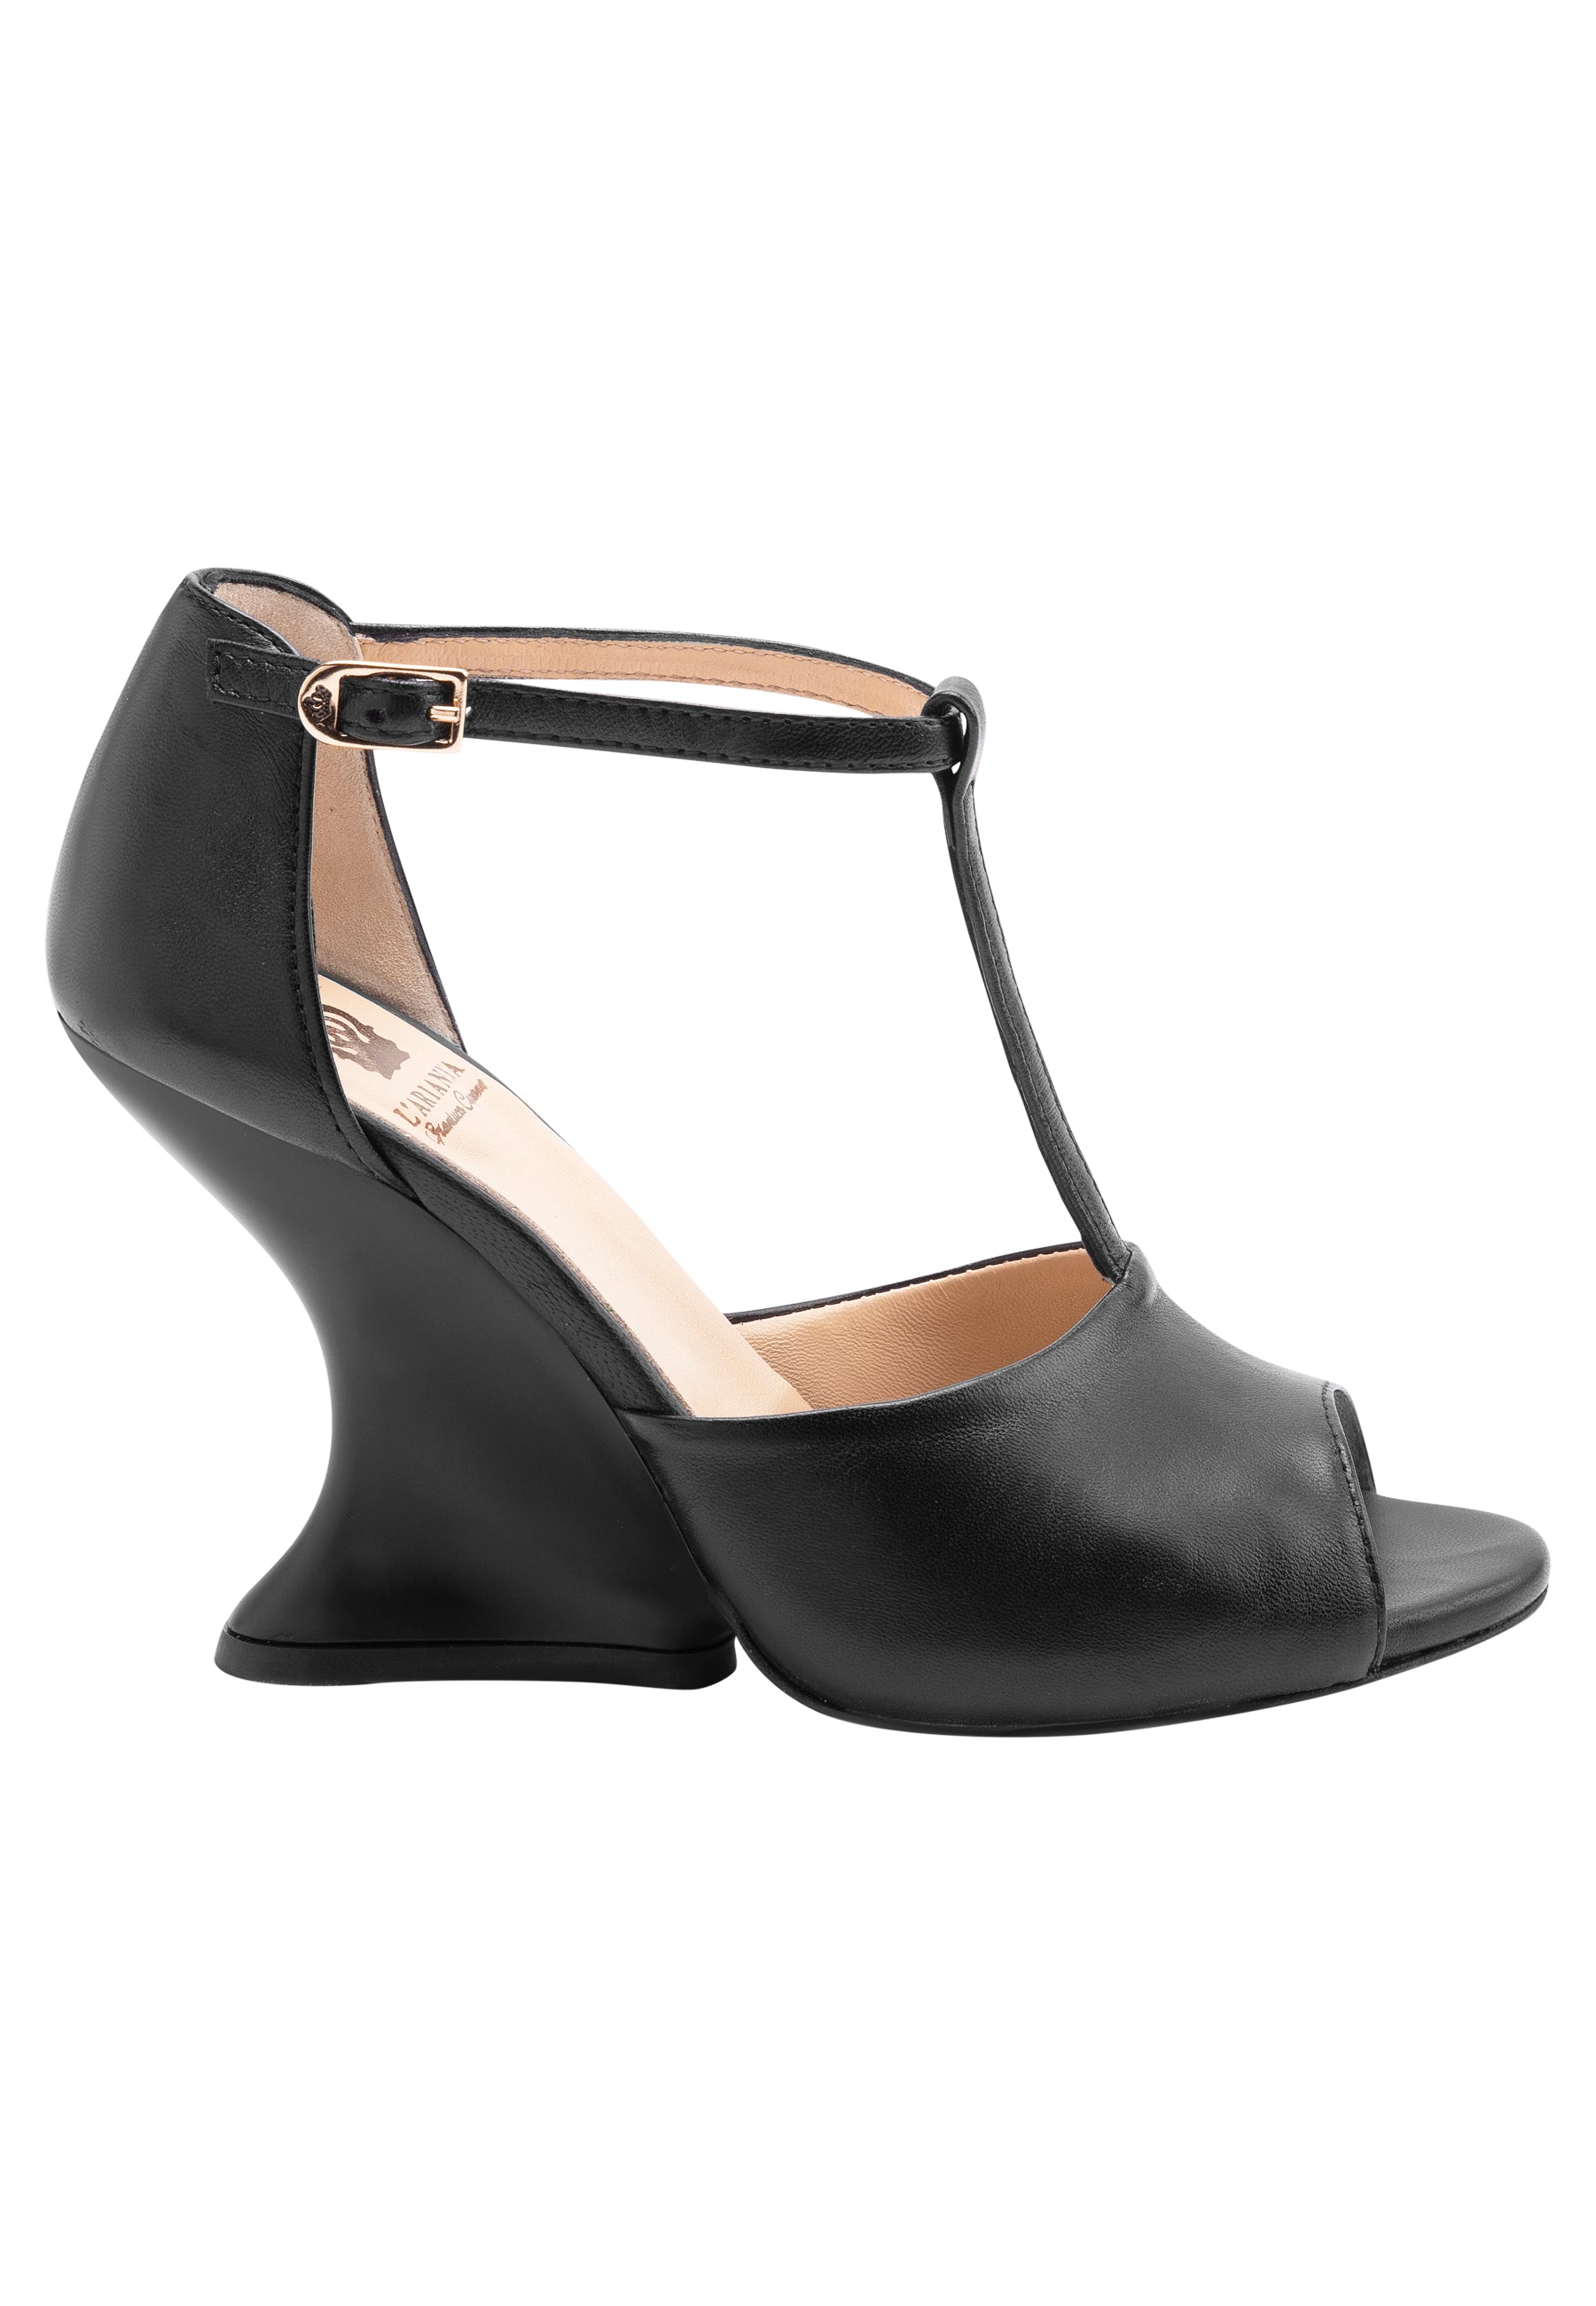 Women's black leather sandals with high wedge and ankle strap